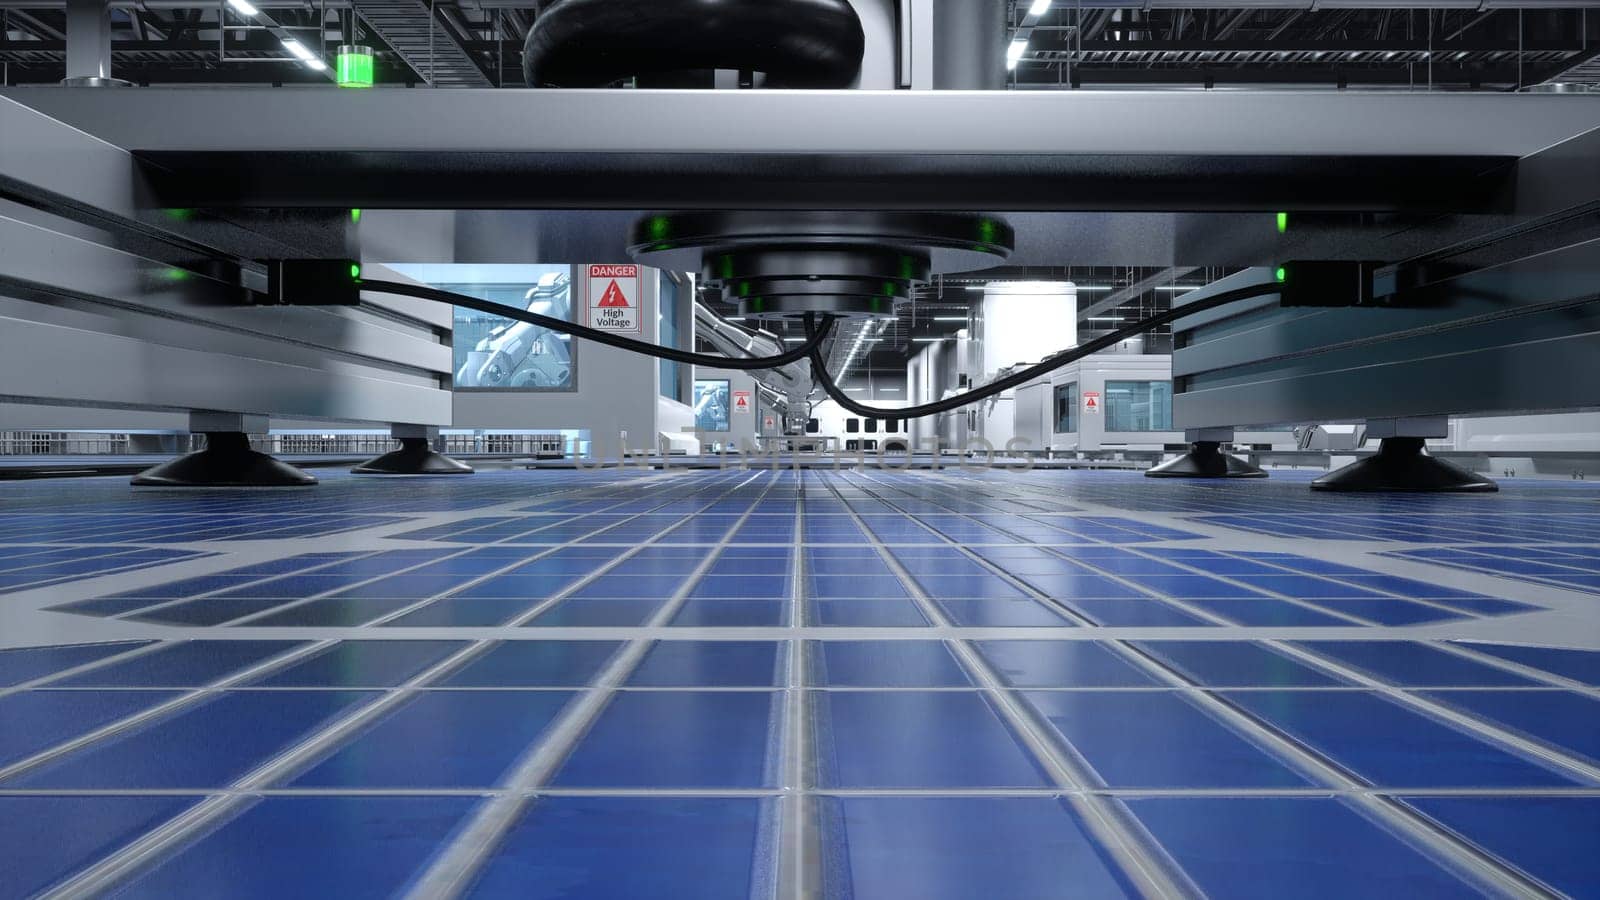 Solar panel placed on conveyor belt, moving around facility in high voltage area, 3D render. Close up shot of blue photovoltaic cell sitting on assembly line in manufacturing warehouse